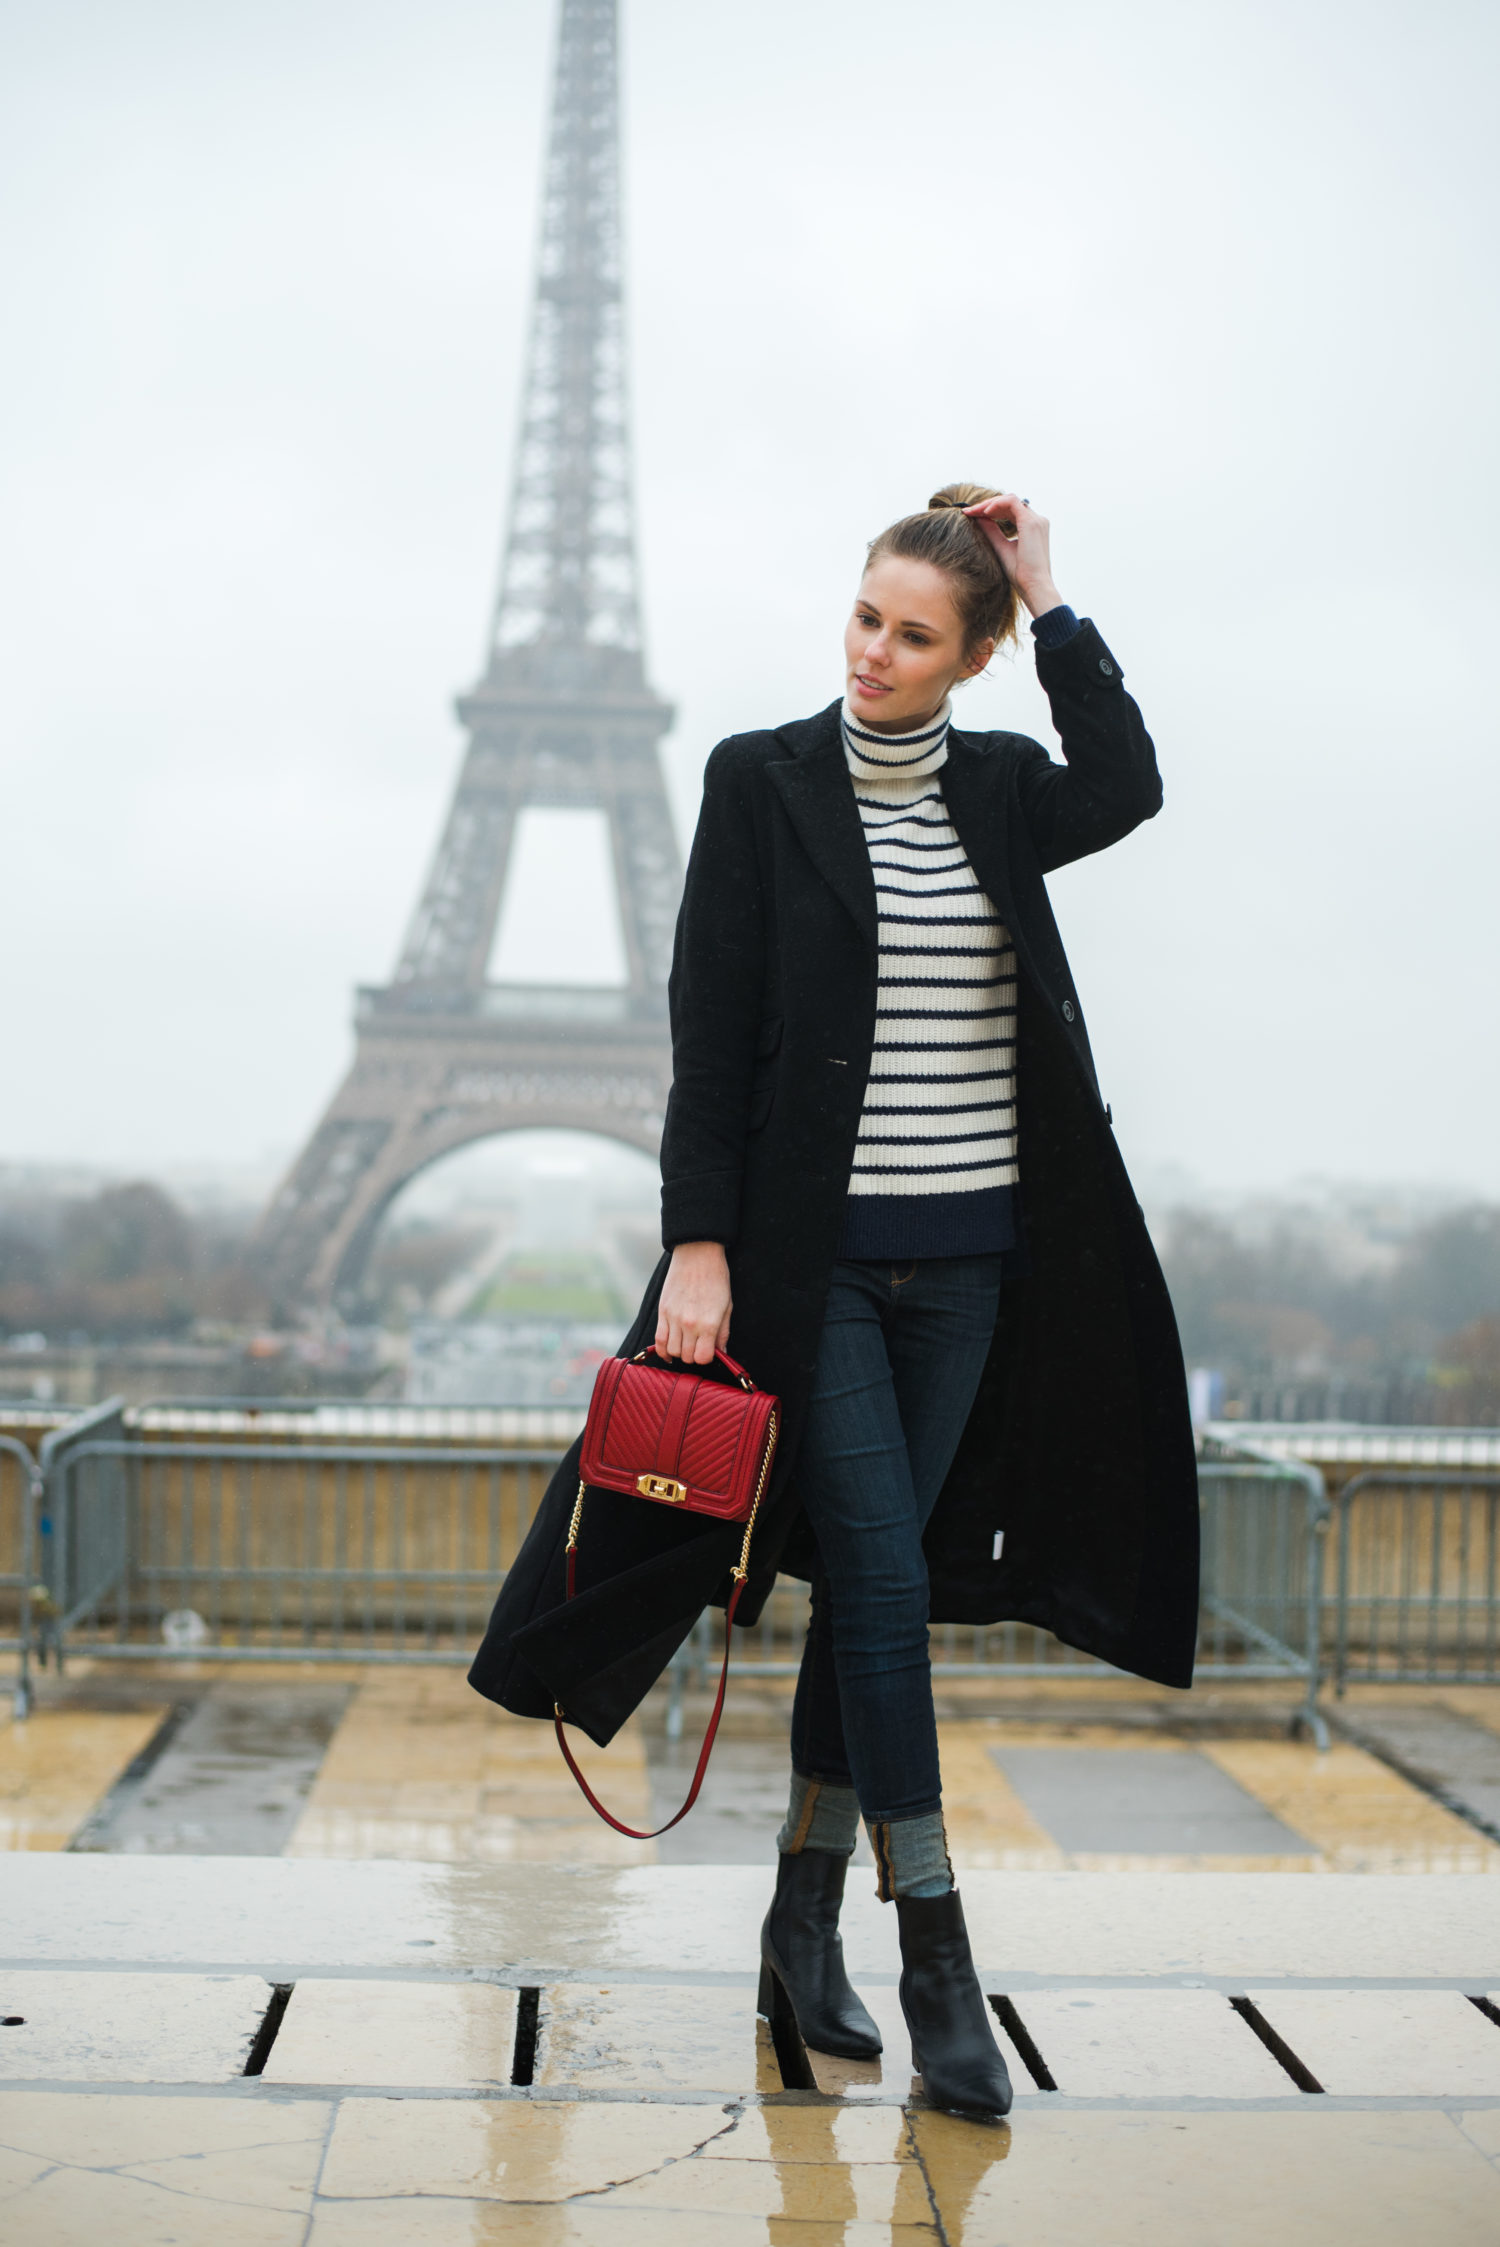 Miss USA 2011 Alyssa Campanella of The A List blog visits Paris, France wearing Rebecca Minkoff Quilted Chevron Bag